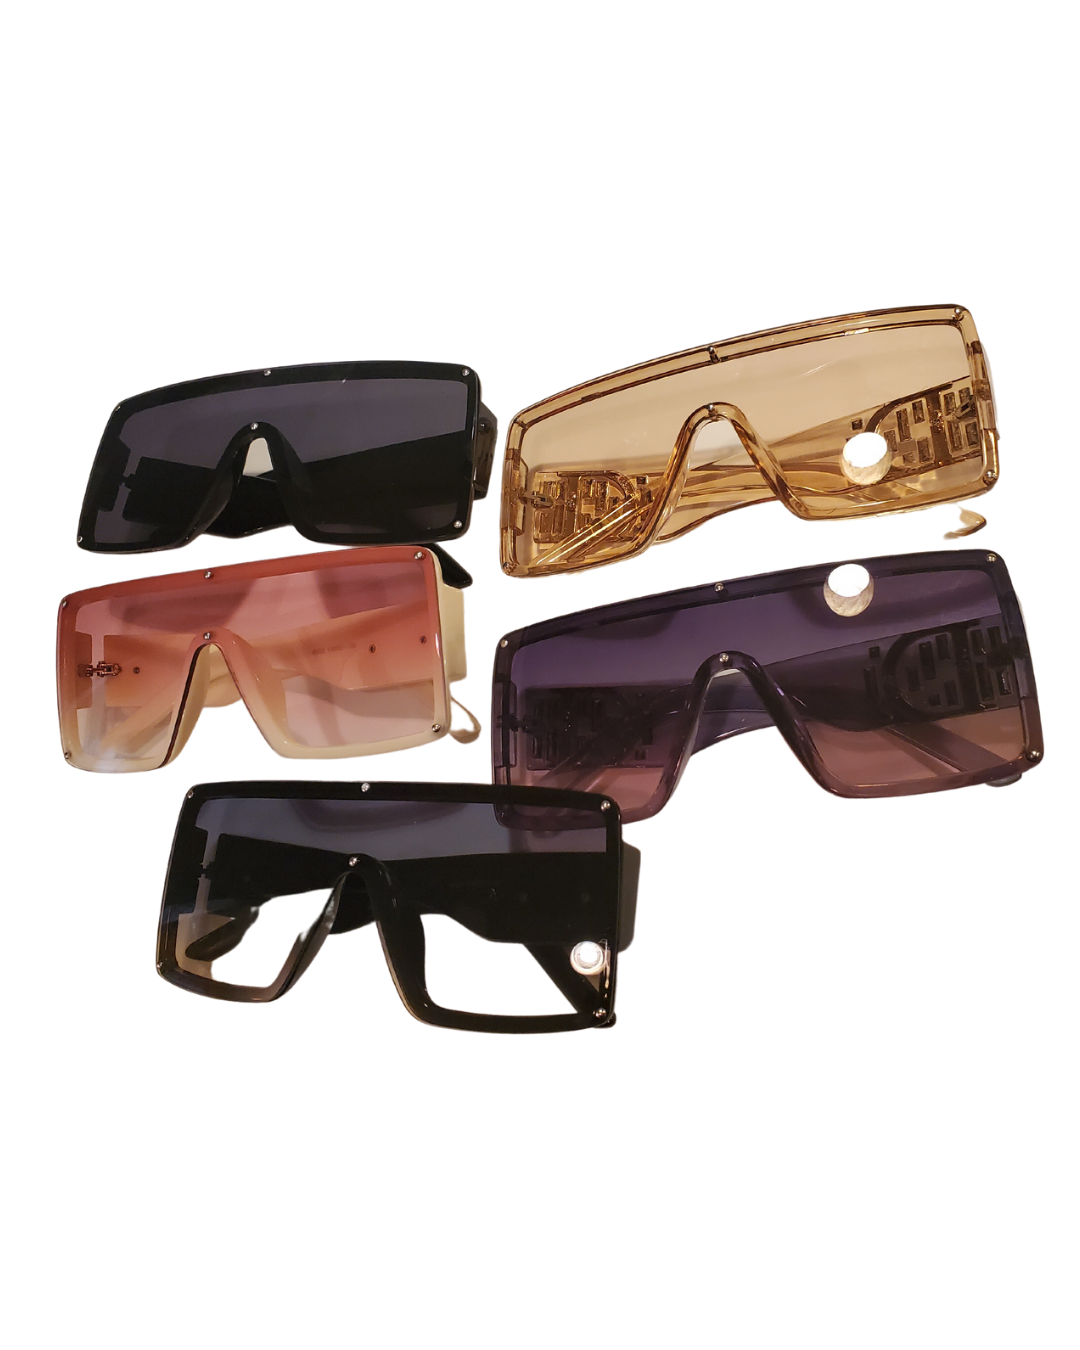 women sunglasses blocker. these shades are big shades. colors are cream, black, pink and cream, black and gray, black and pink